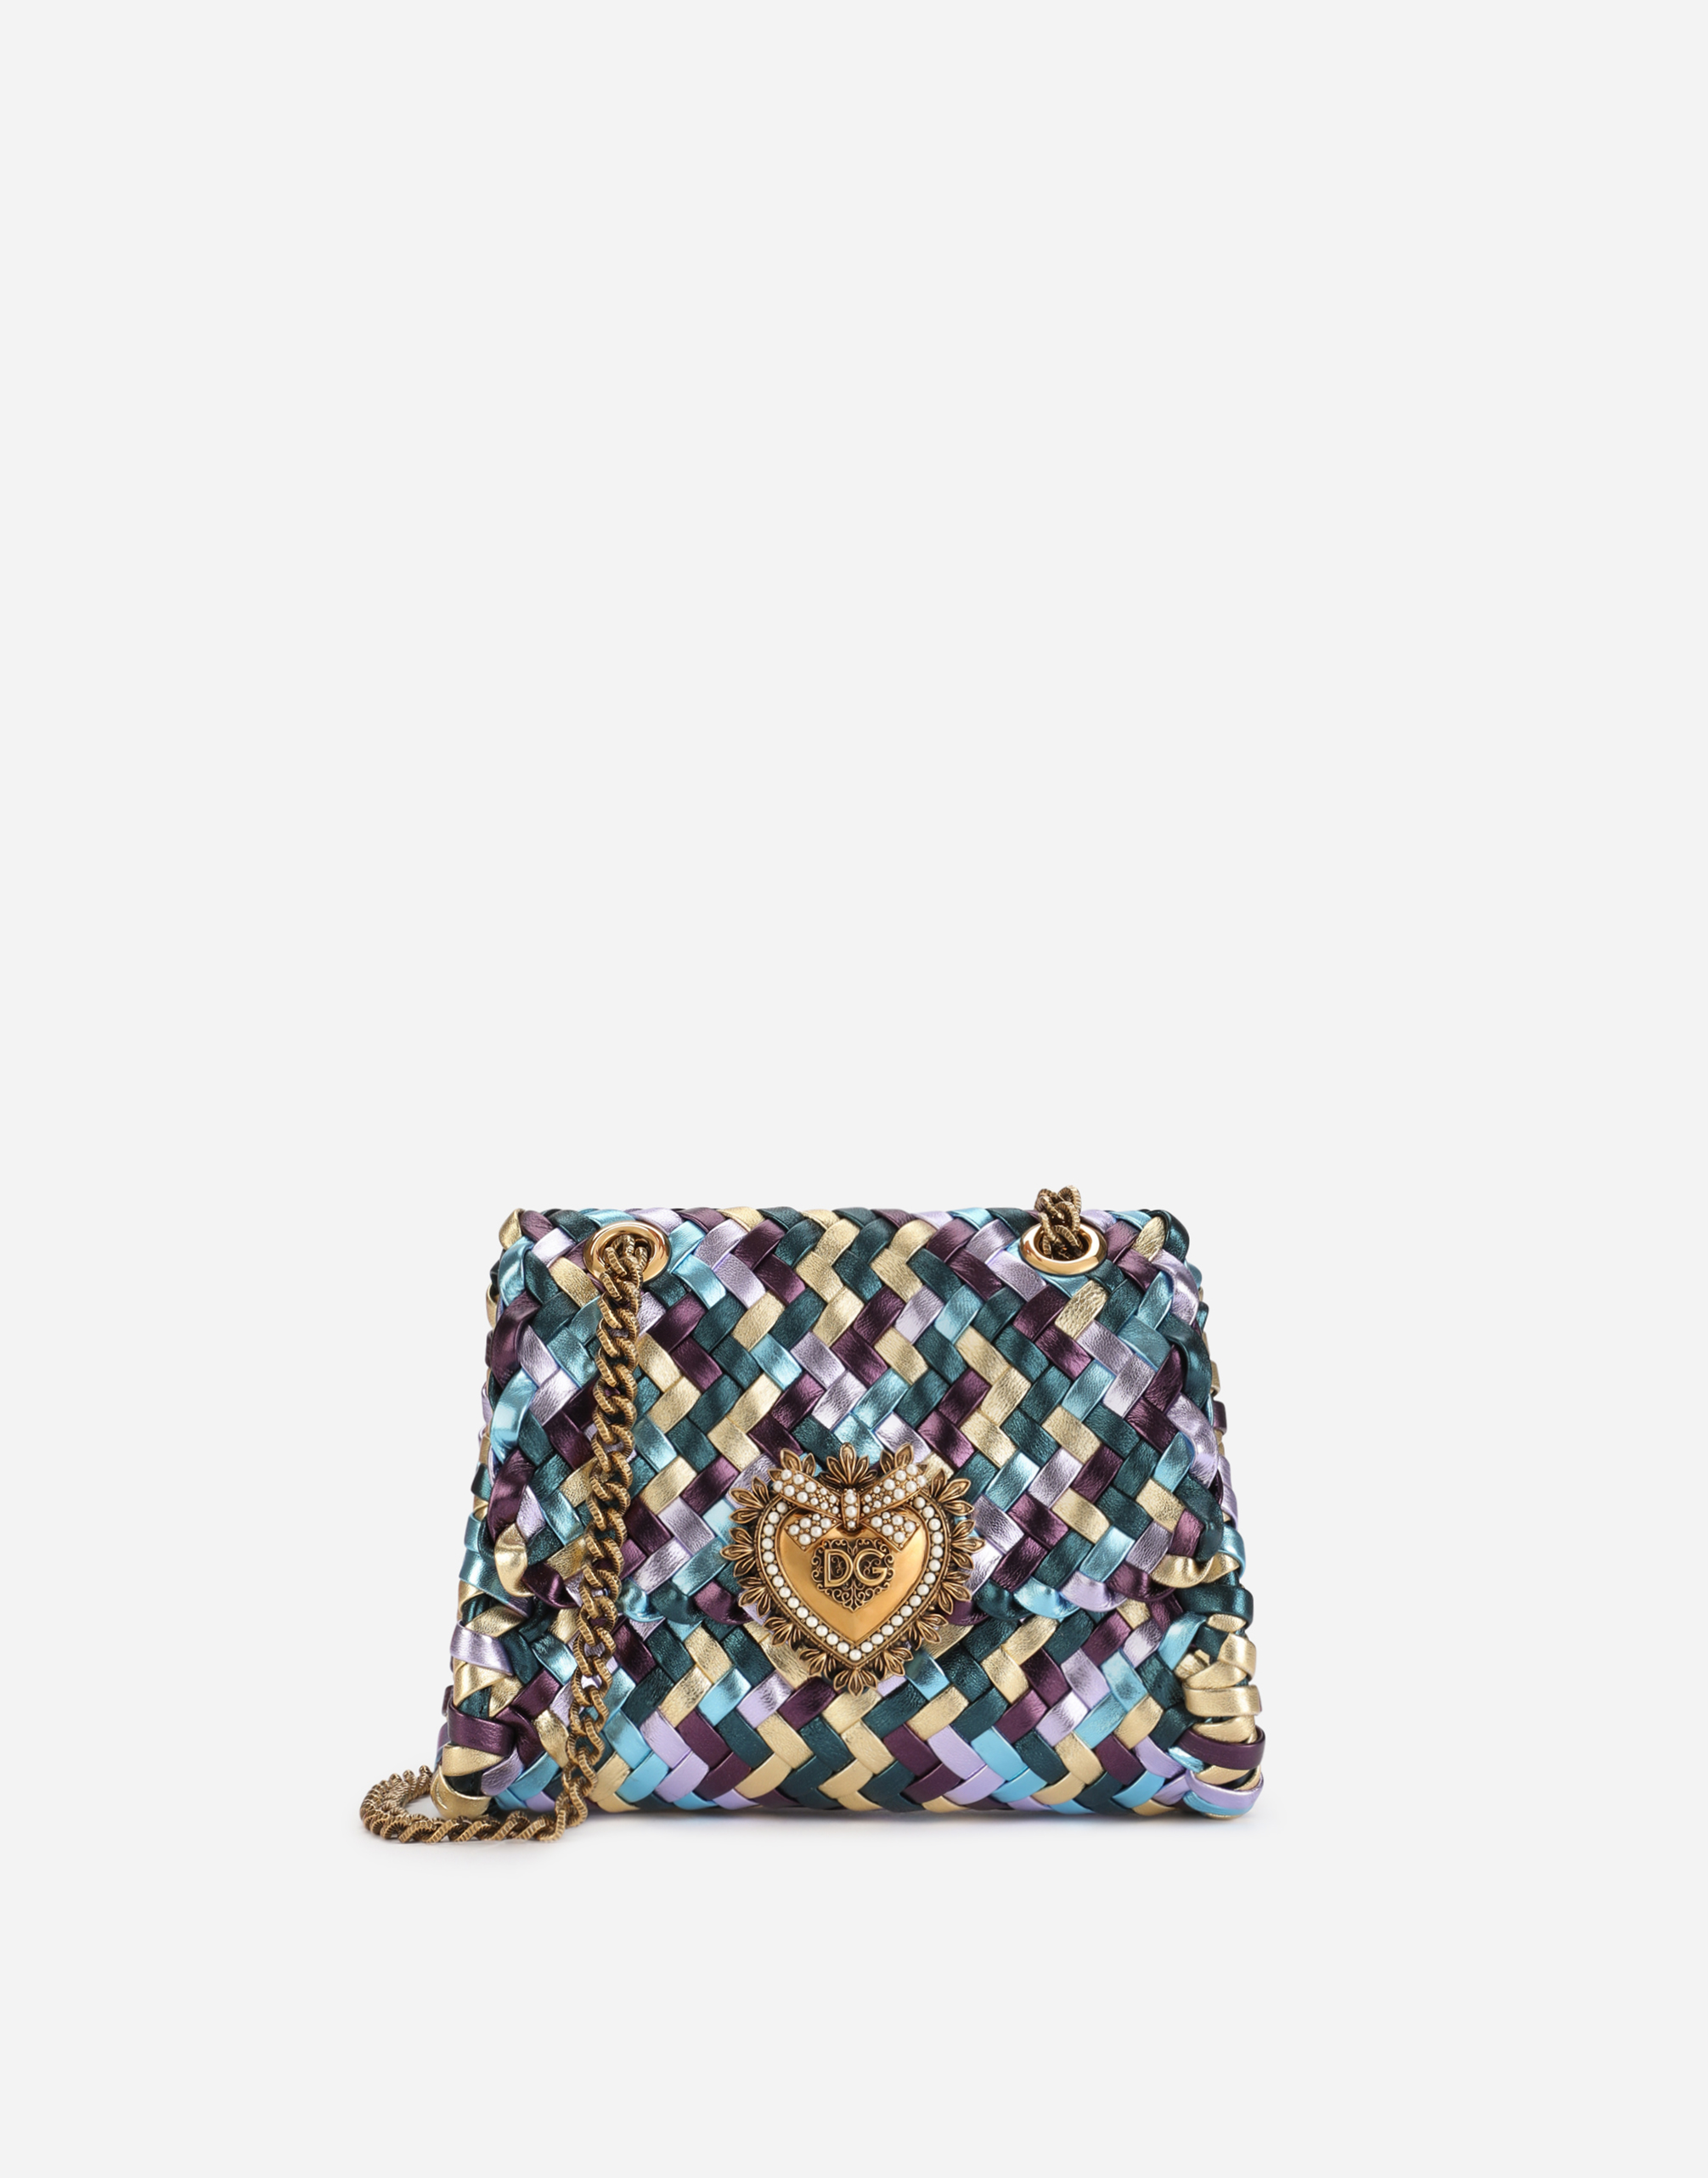 Small Devotion shoulder bag in woven laminated nappa leather in Multicolor